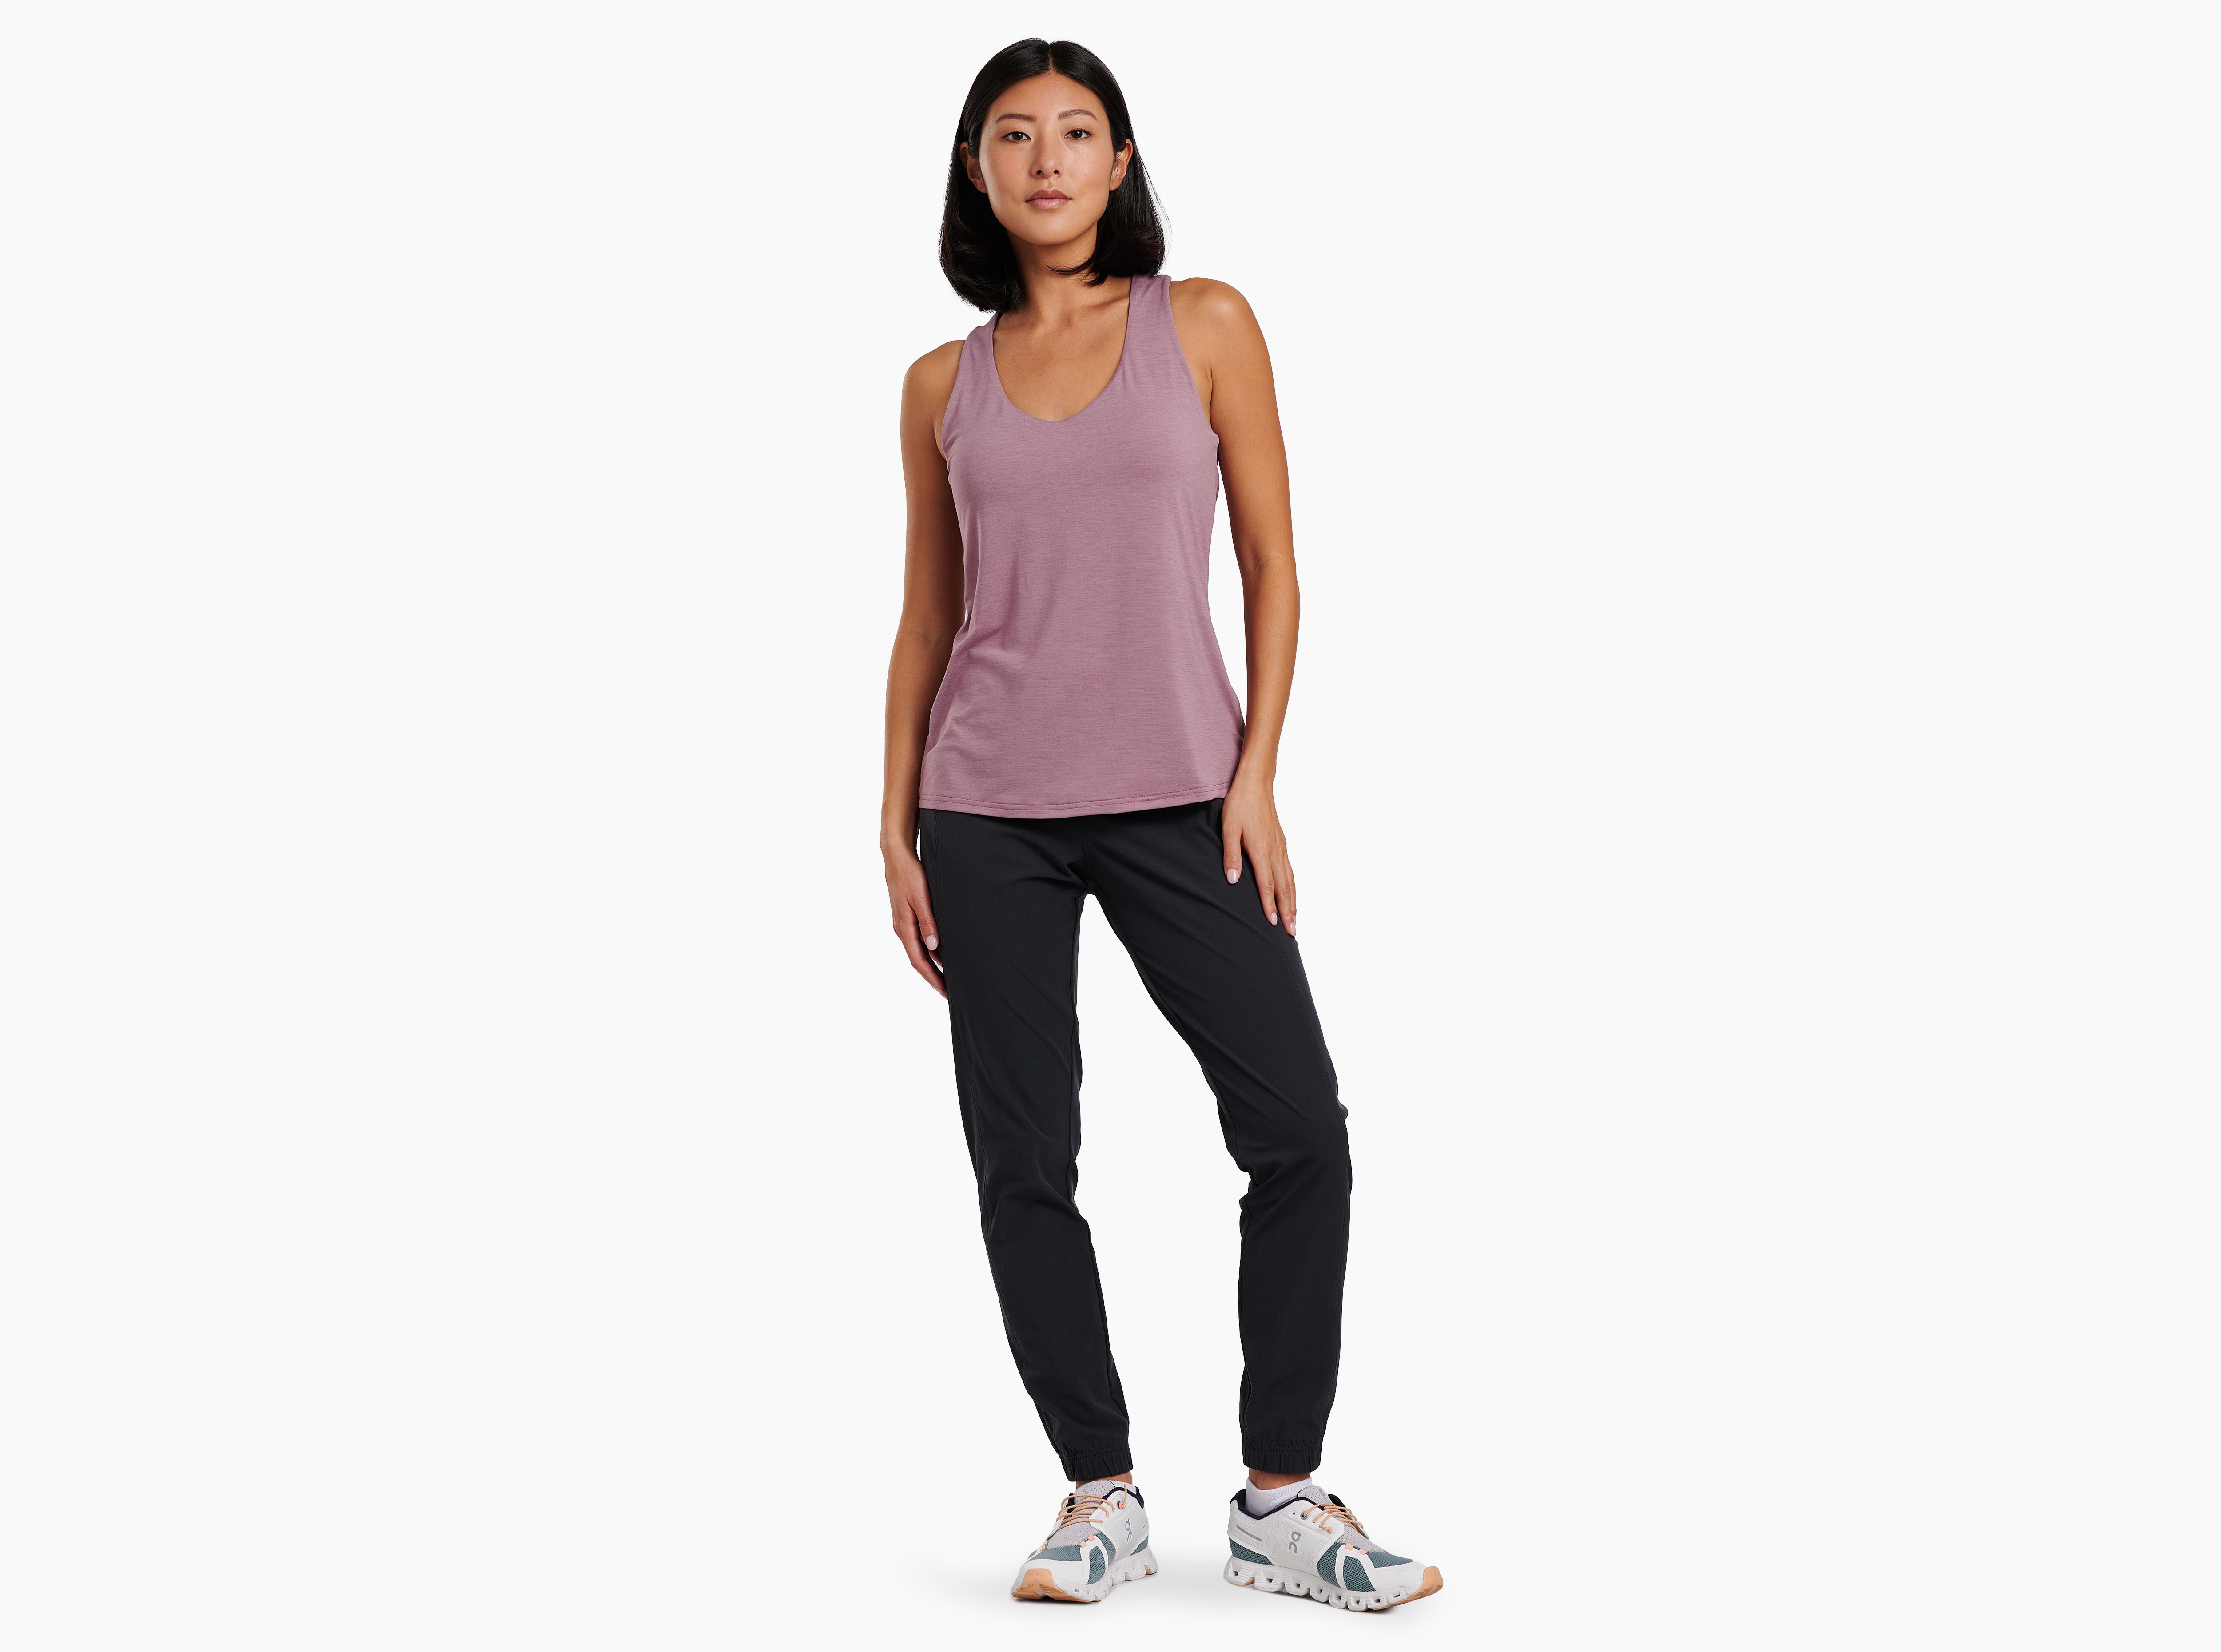 TRANQUILITY Tank Top – Inspira: The Lifestyle Brand